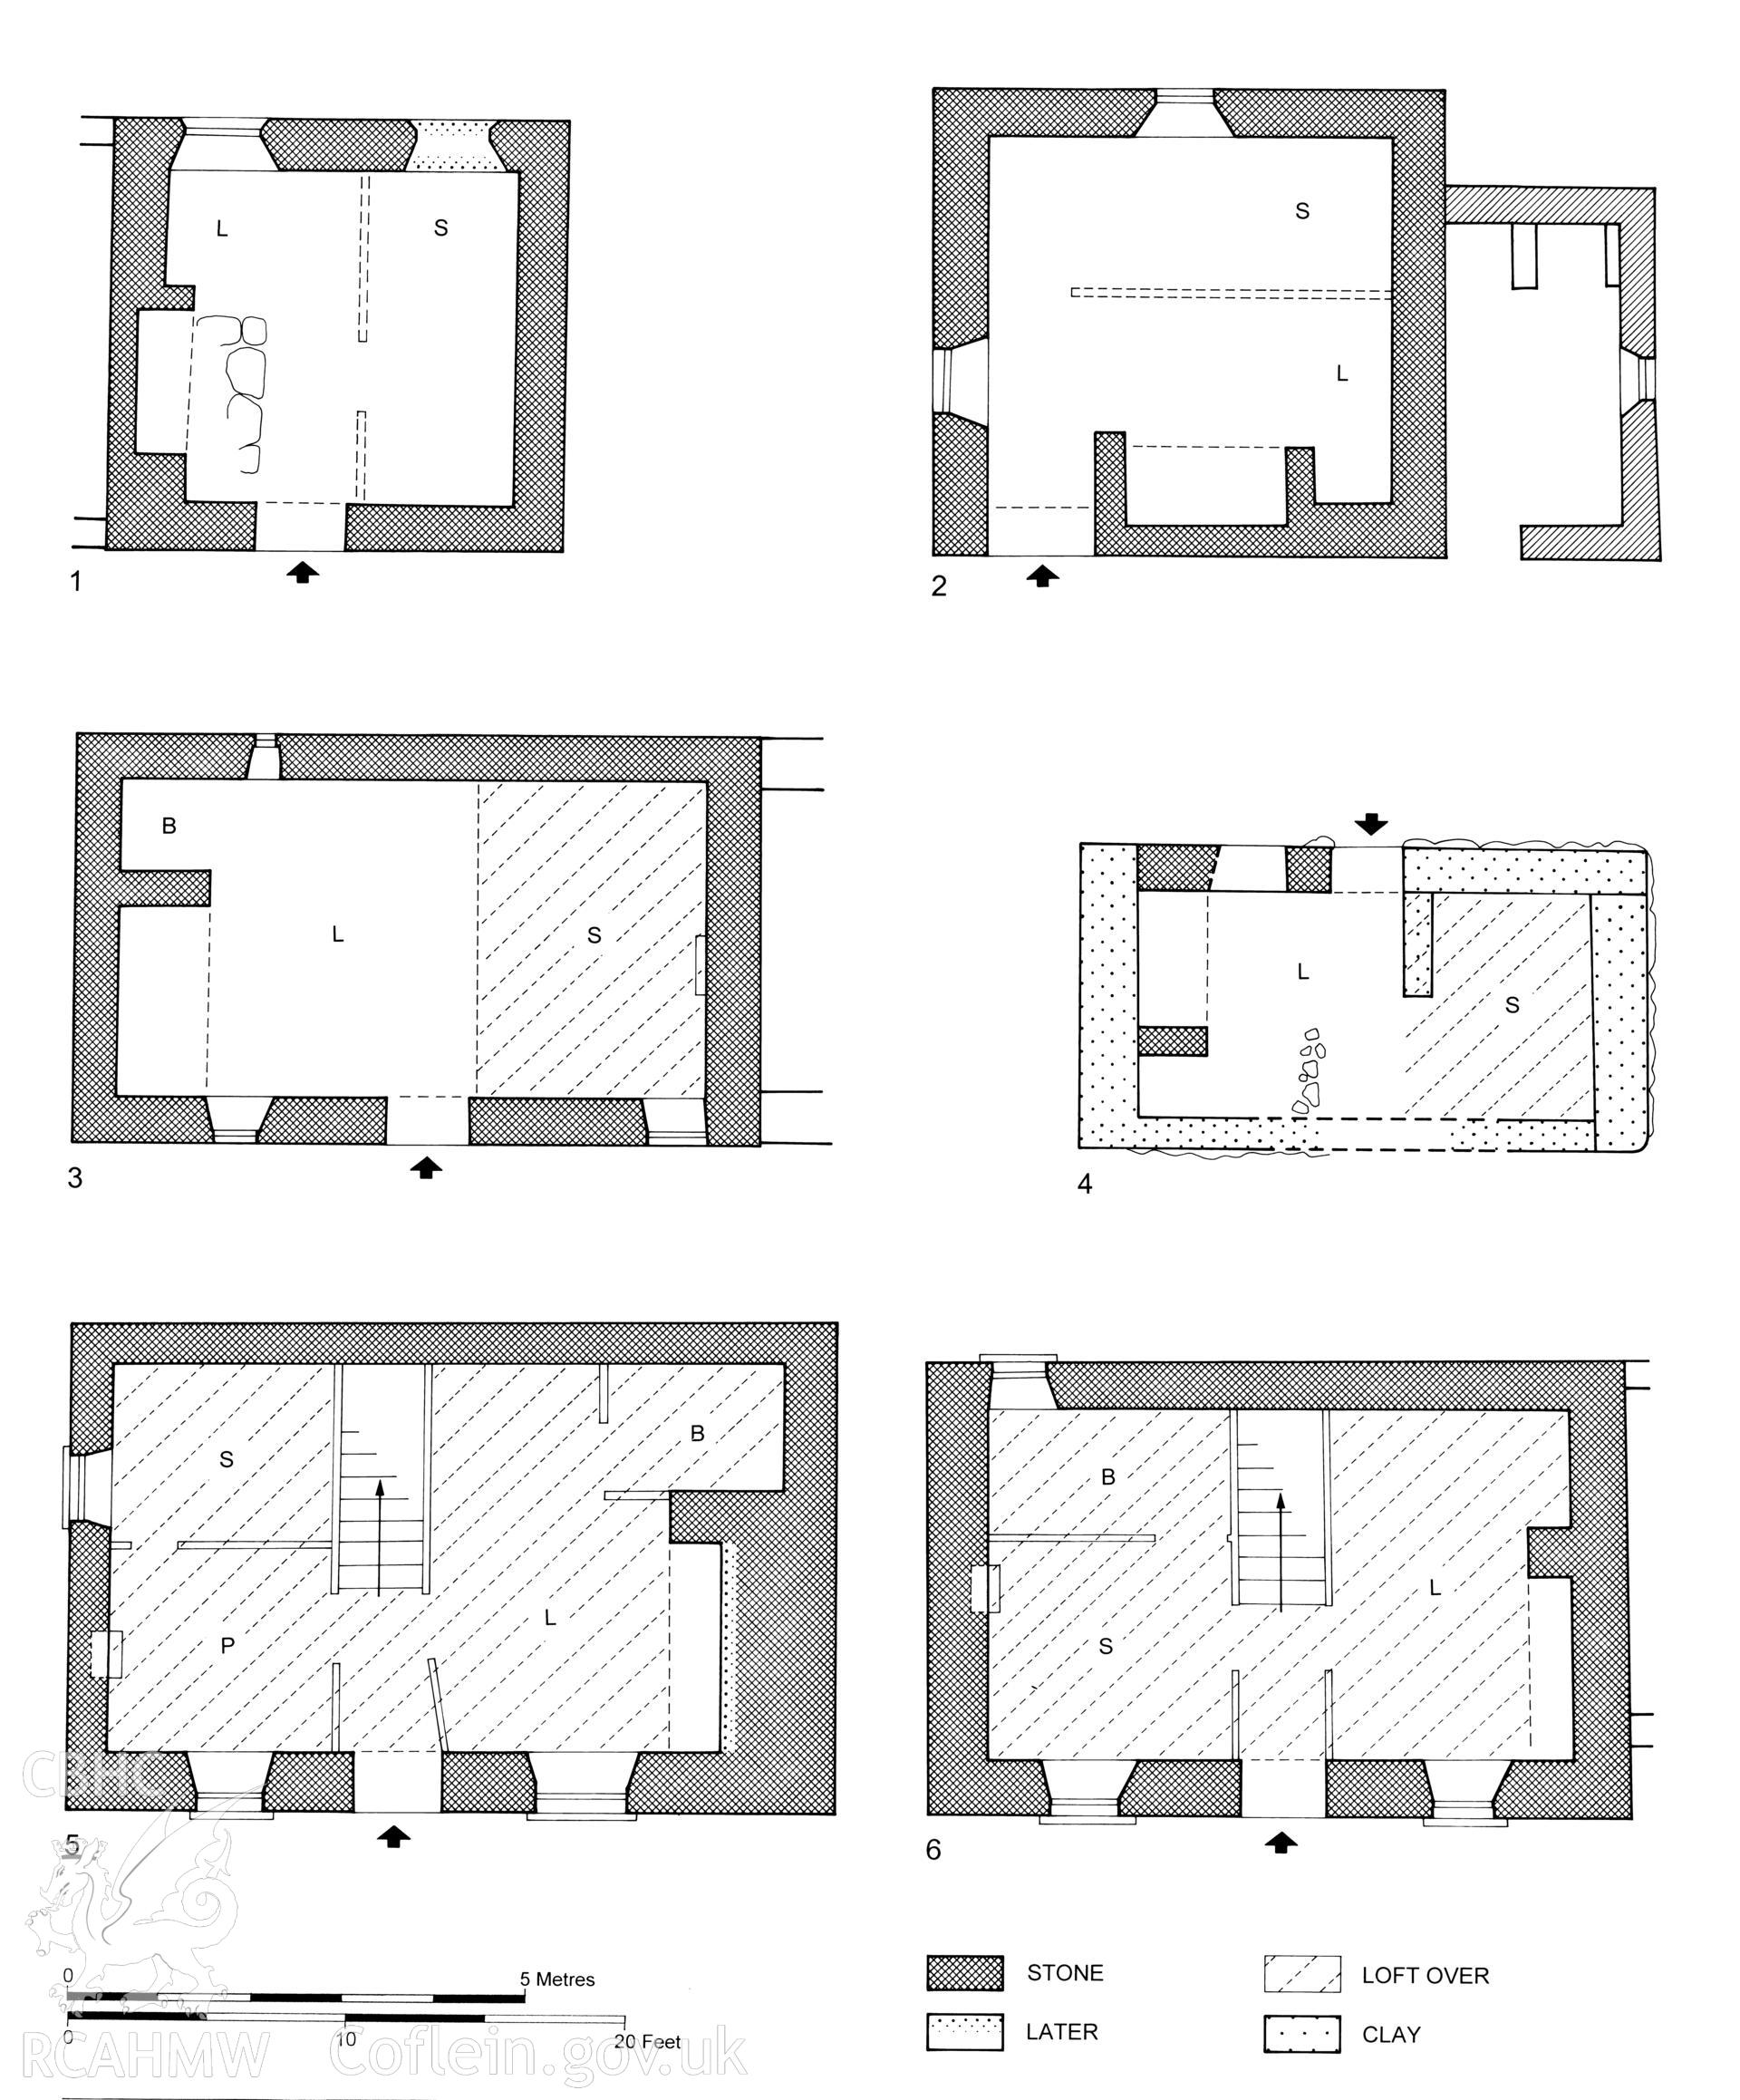 Cottages at Mynytho, Llanengan; measured plans produced by C.W. Green, RCAHMW, 2008.